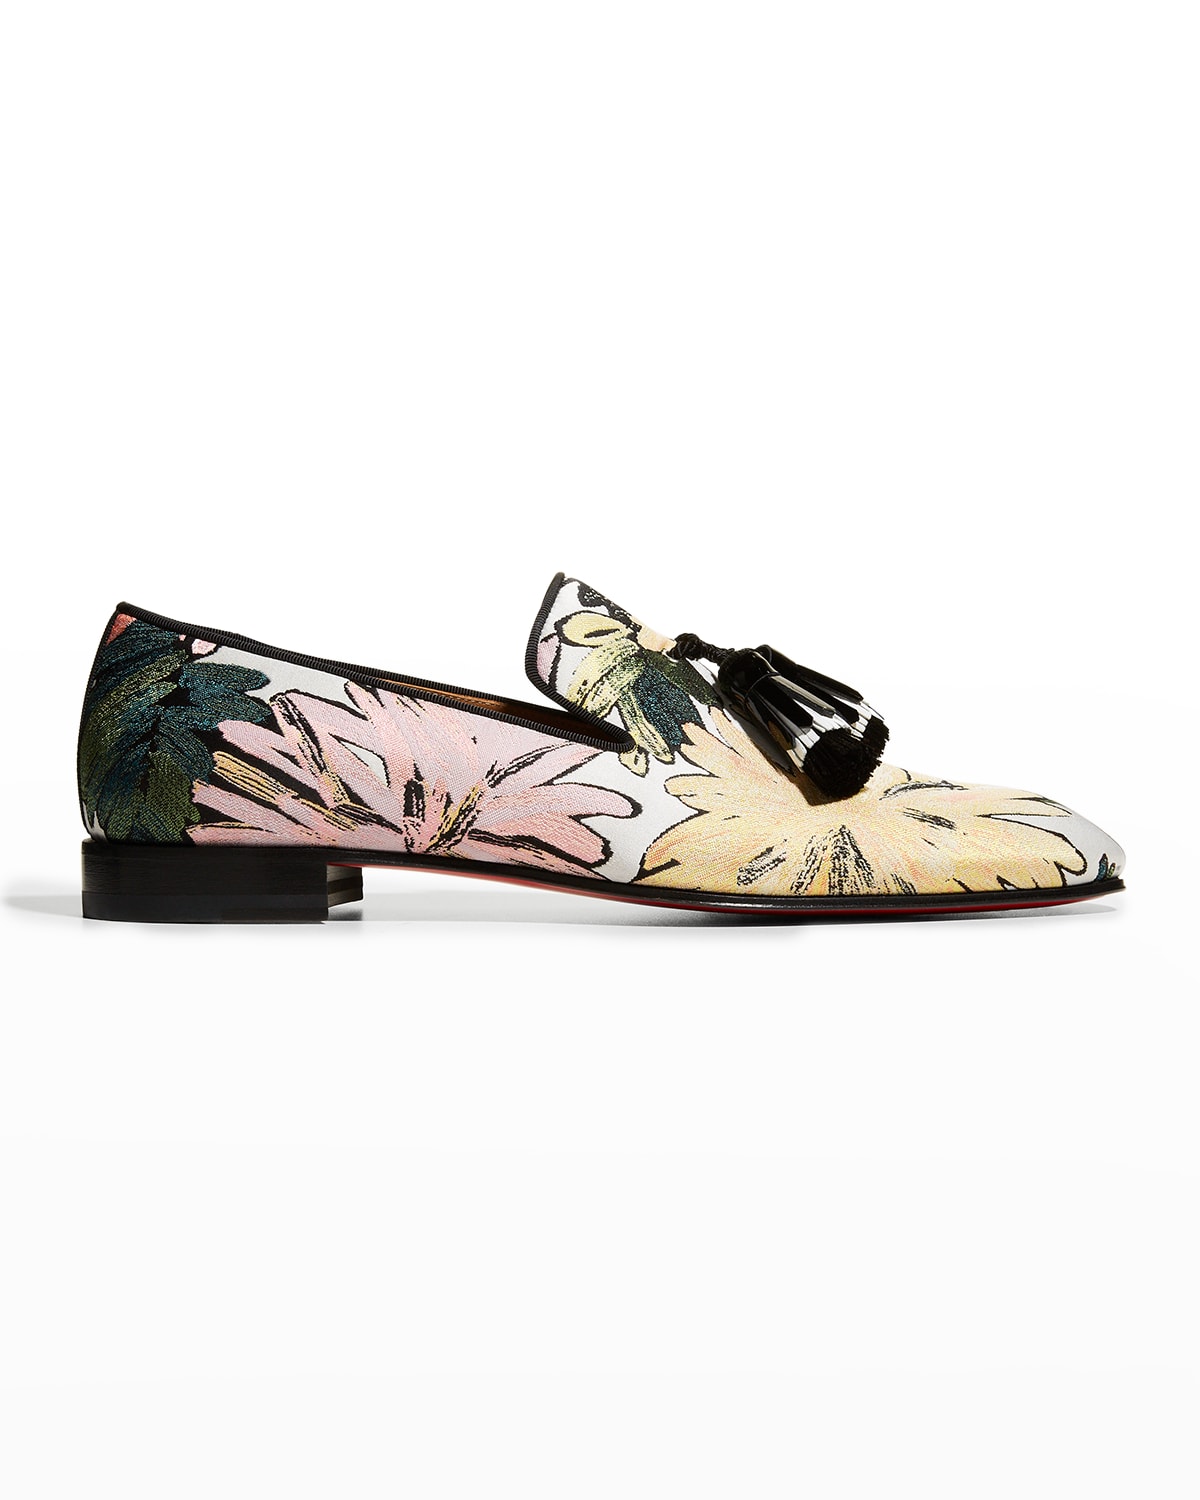 Men's Badmilion Red Sole Floral-Print Loafers